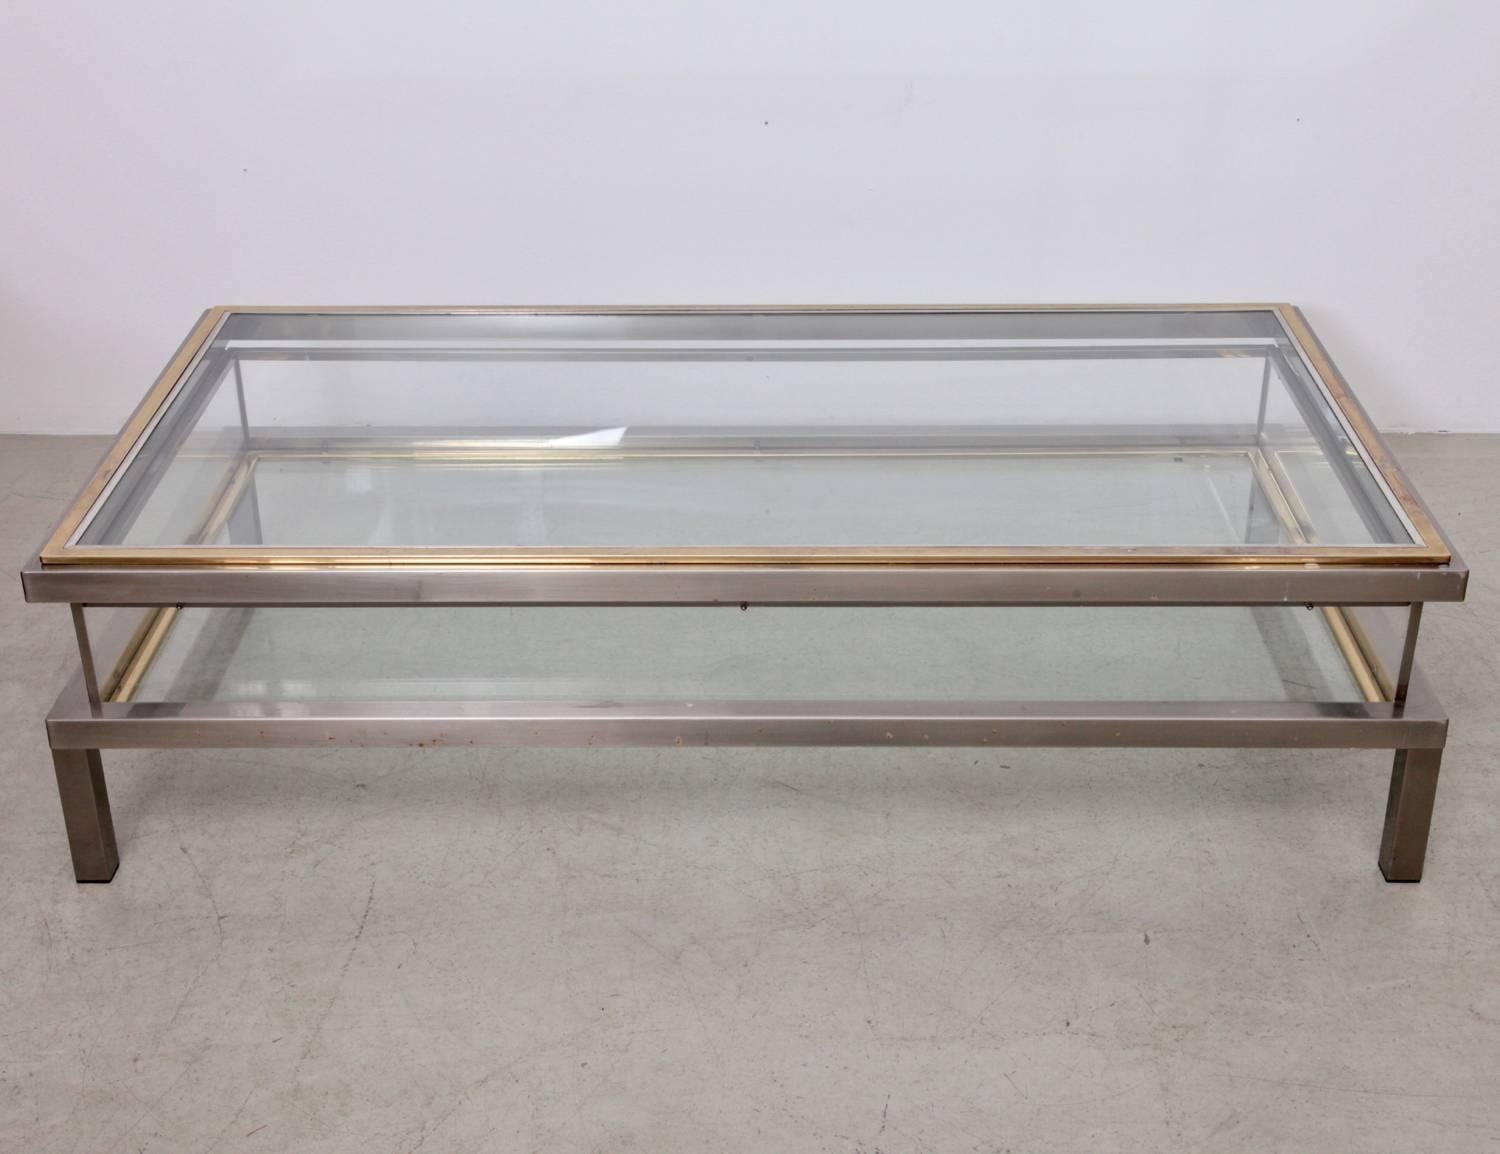 Elongated glass table with sliding top by Maison Jansen. Frame has an total original gold-plated and chrome metal finish.

